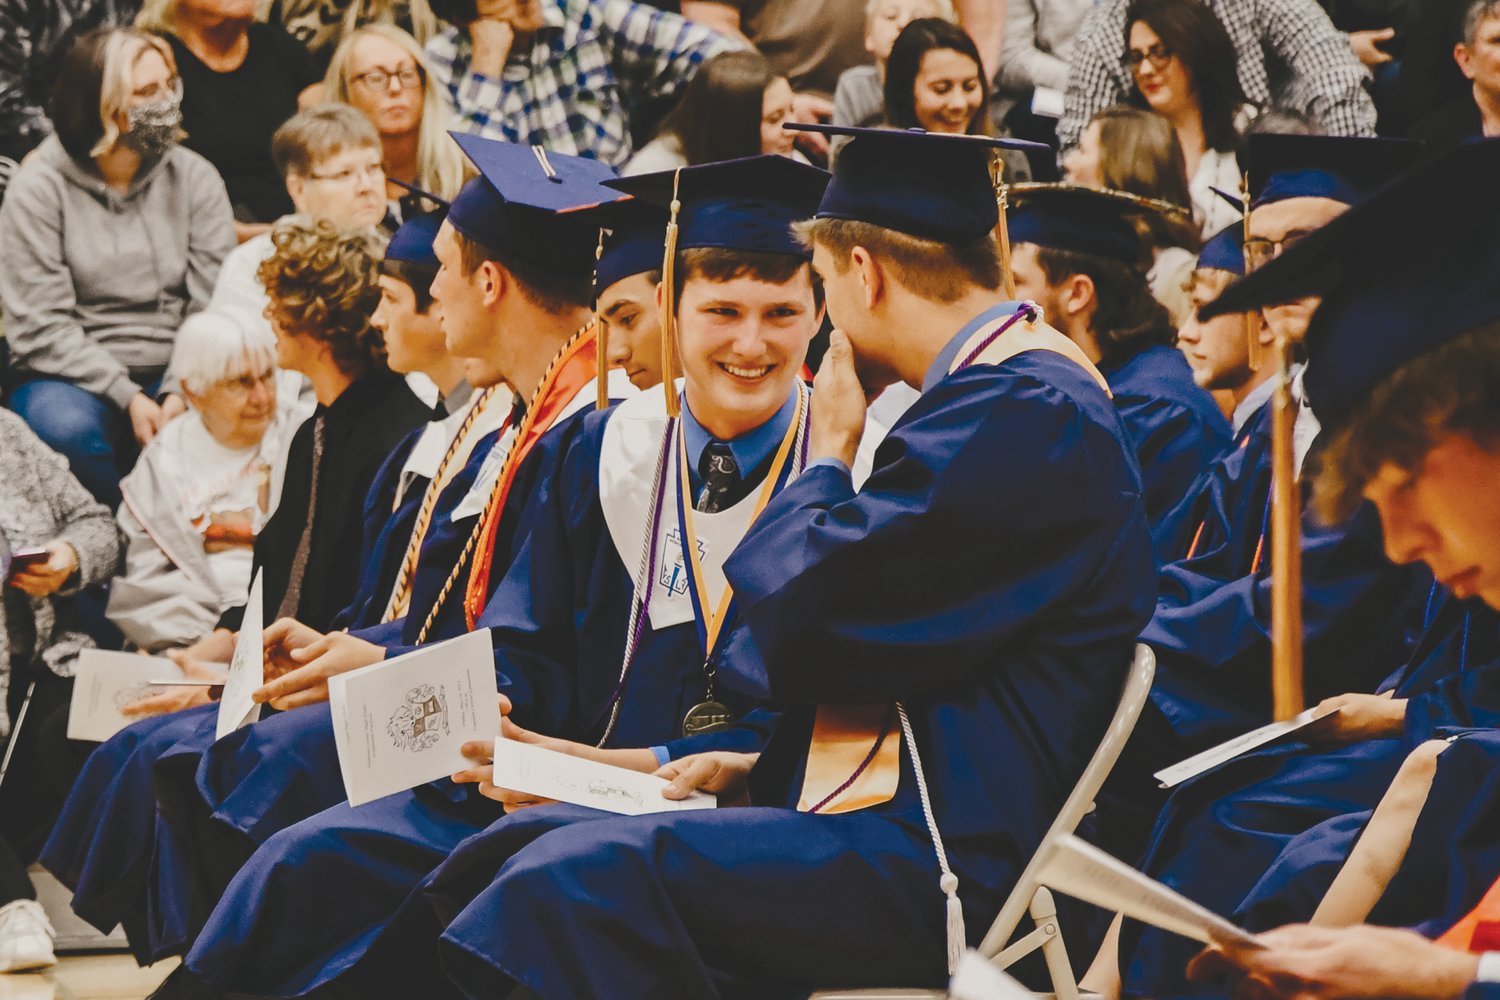 Sawyer Keeling, left, and Seth Gayler share a laugh during commencement Friday at Fountain Central High School.